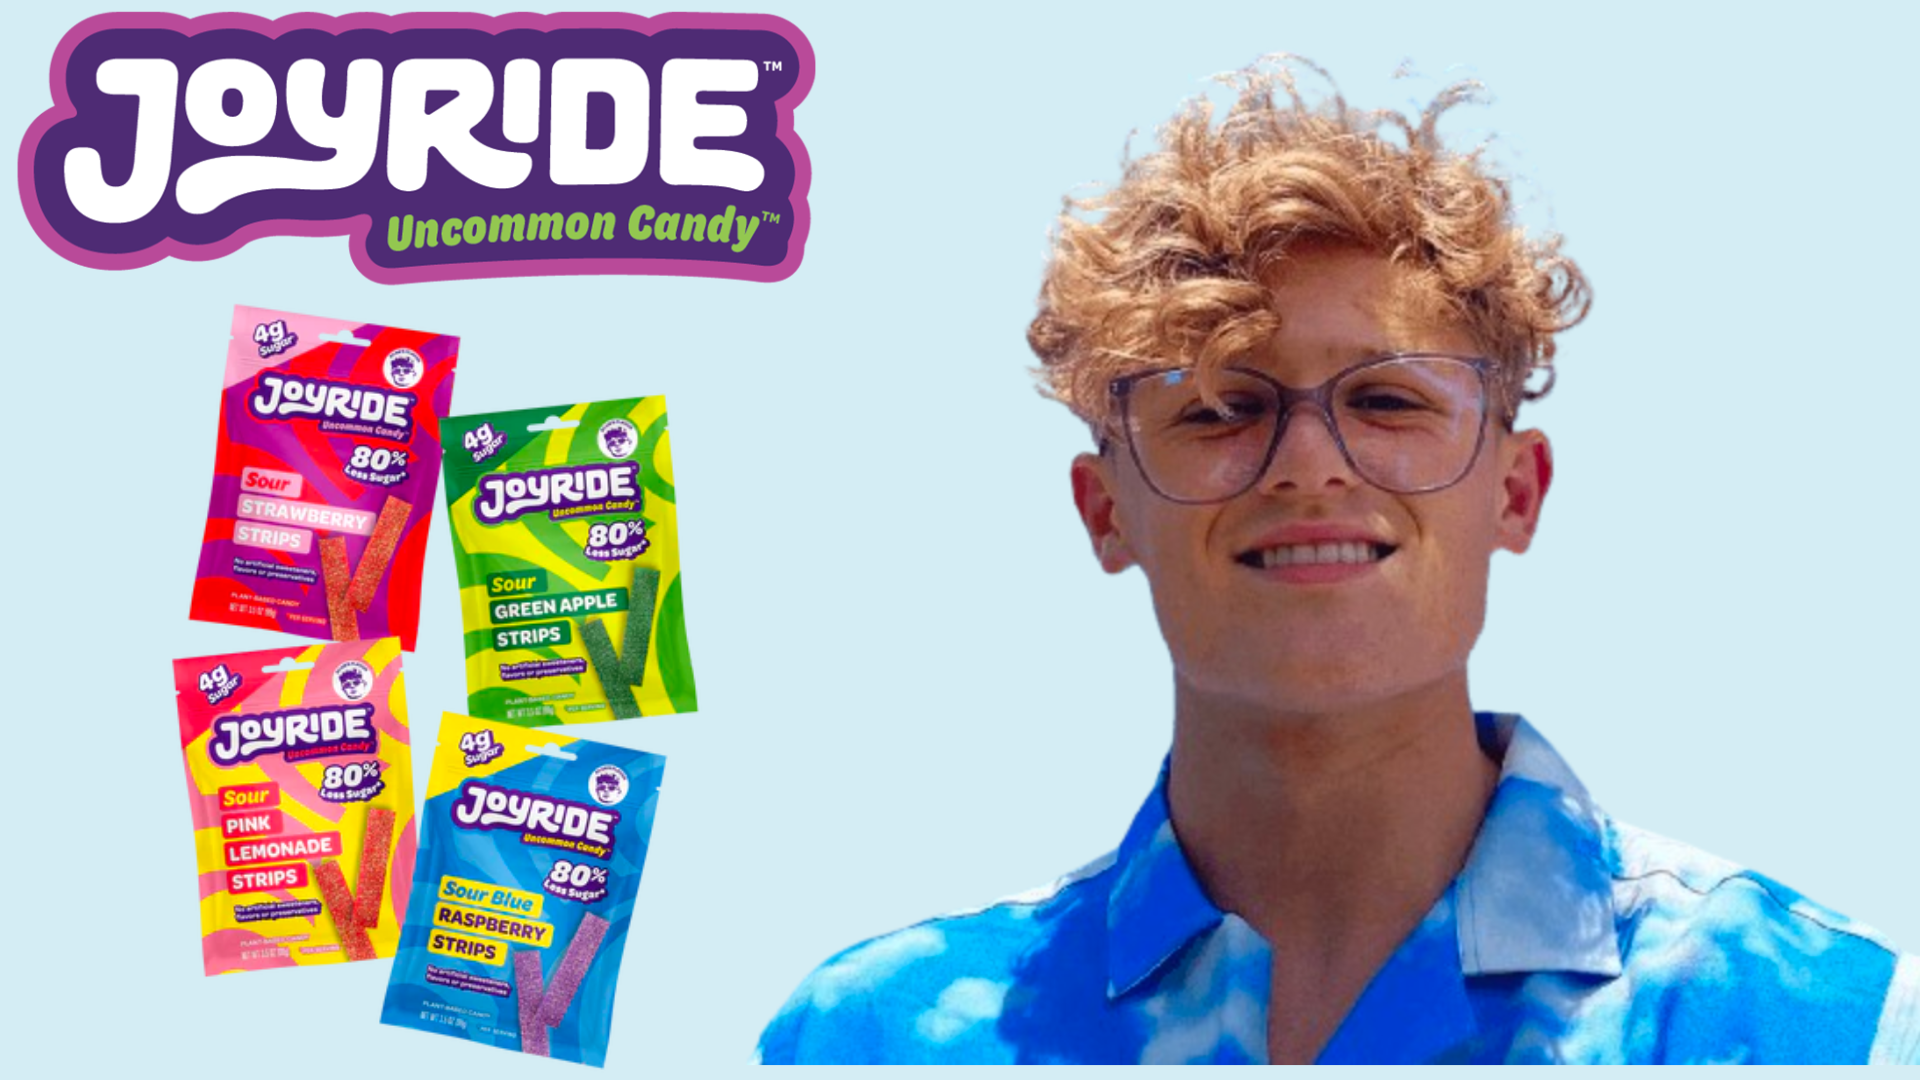 Ryan Trahan partners with Joyride Sweets Candy for Sour Strips